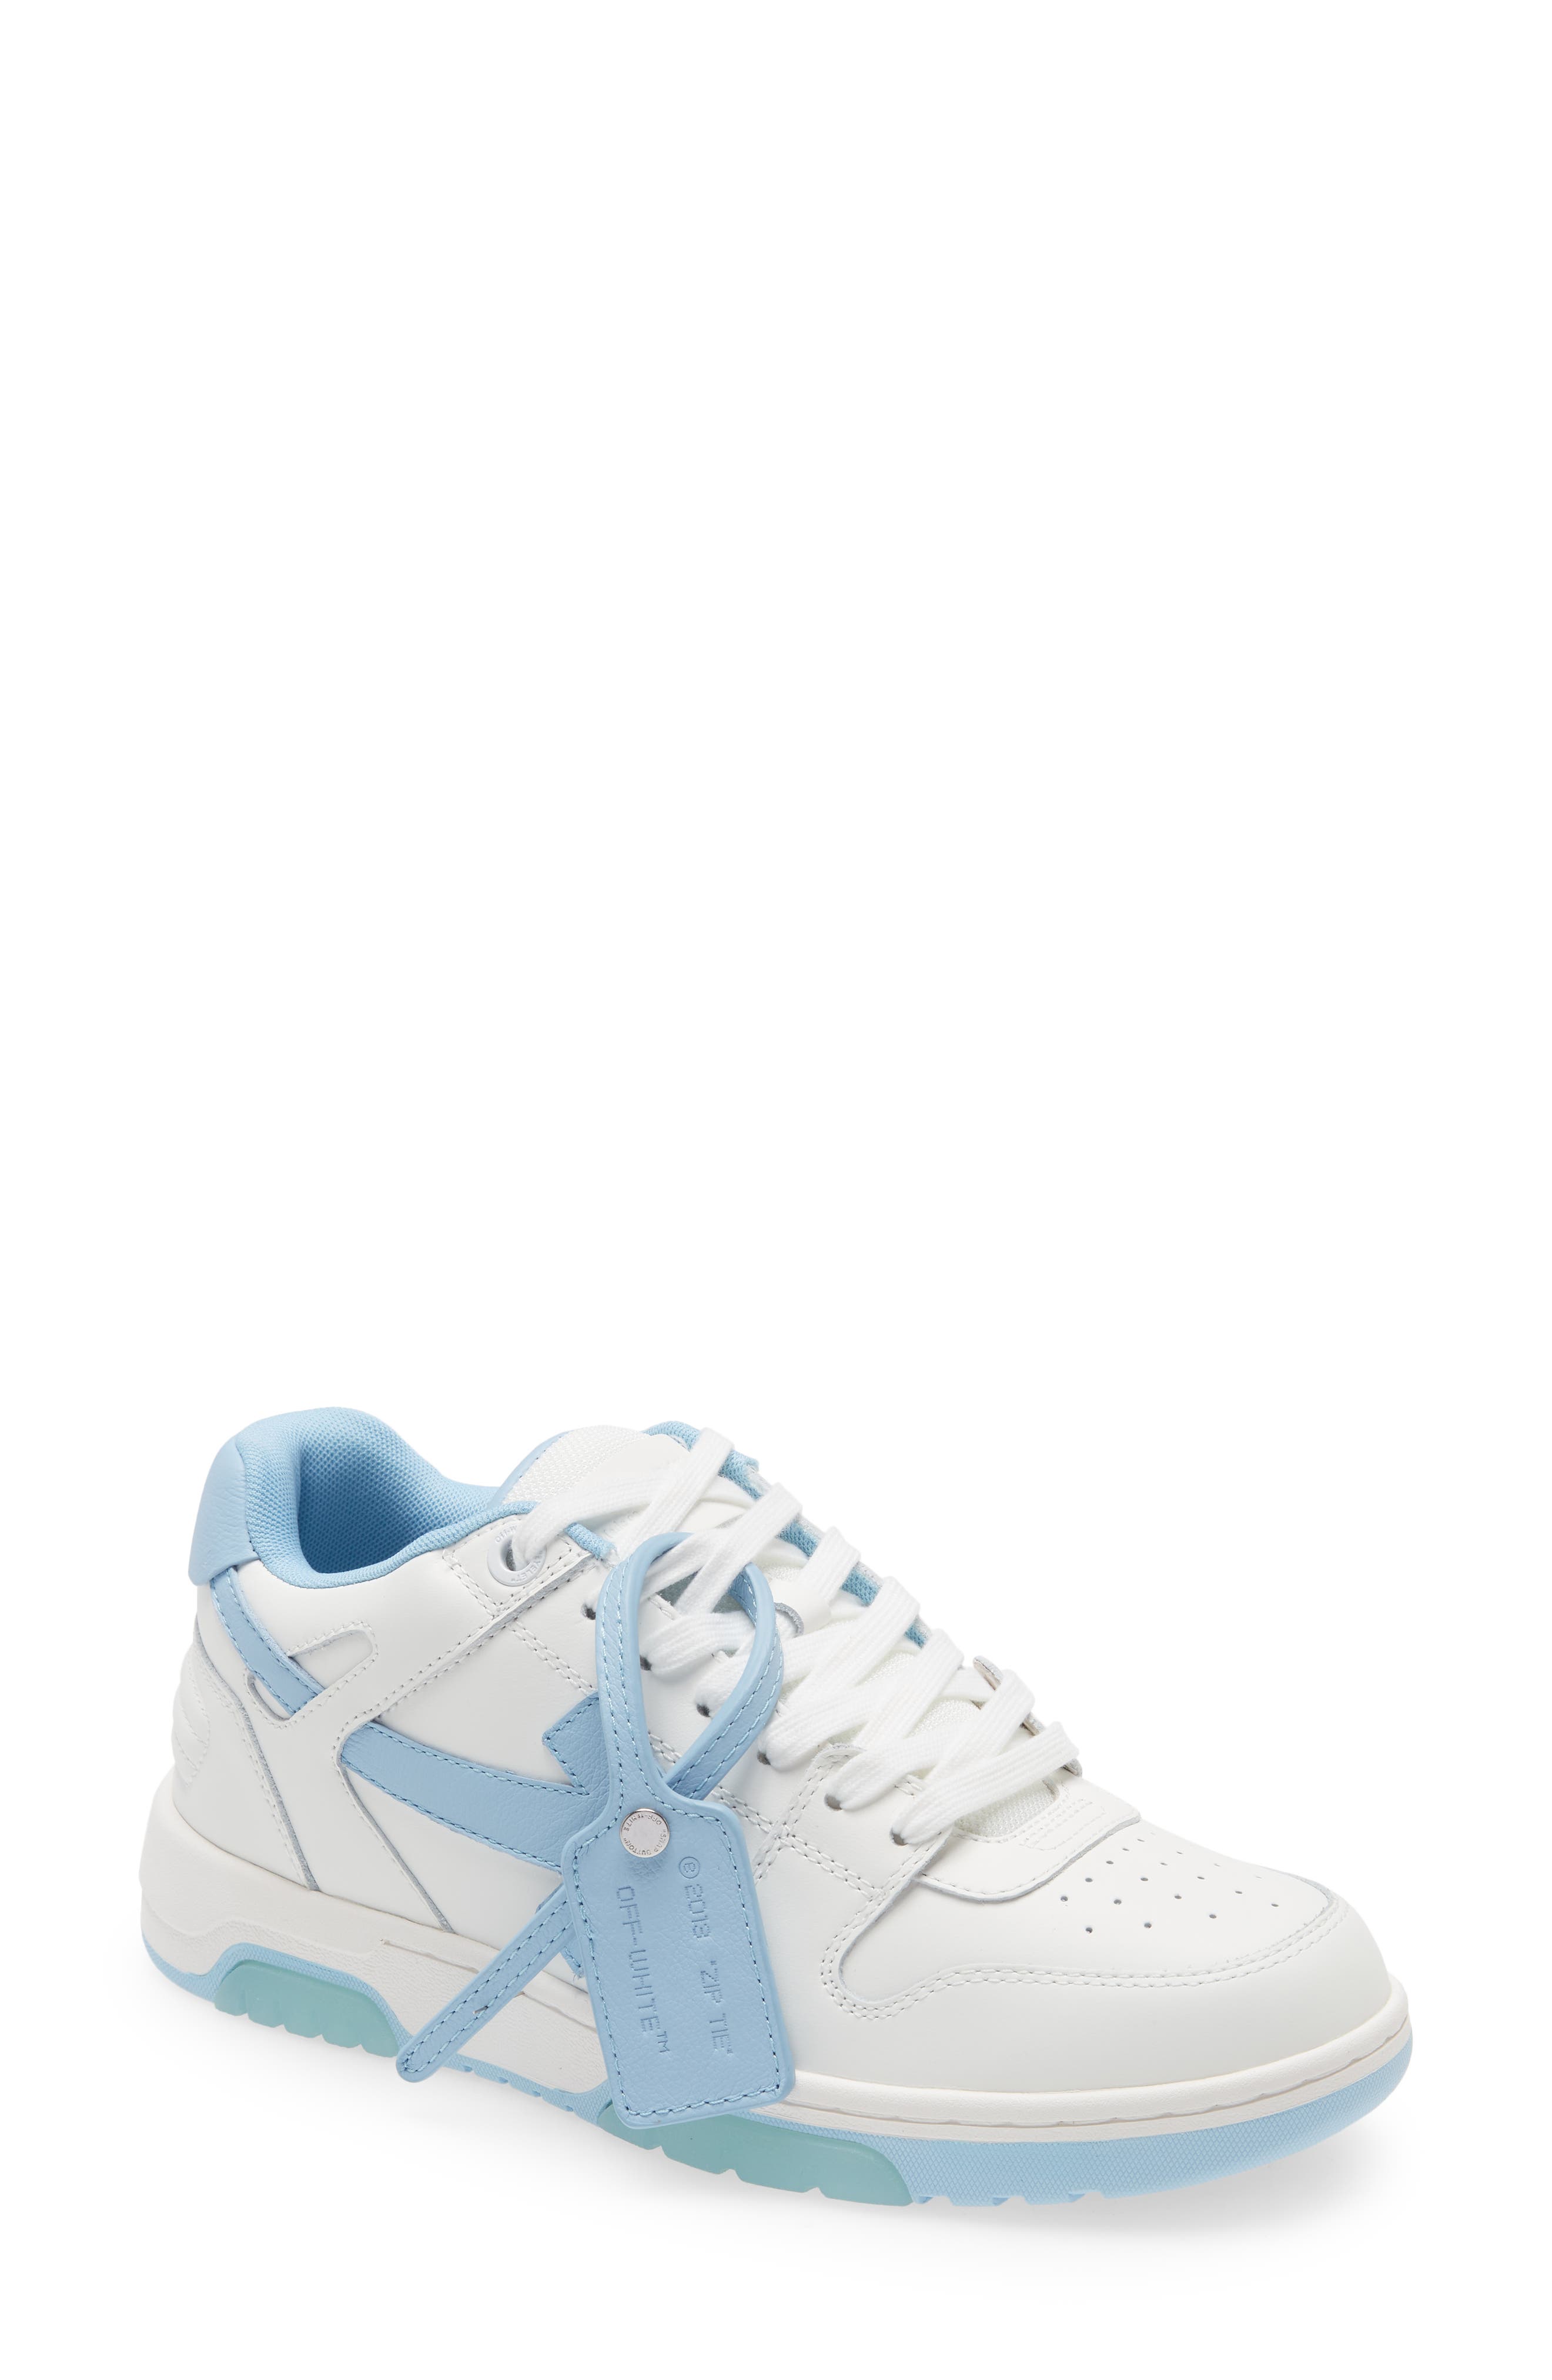 nordstrom white sneakers